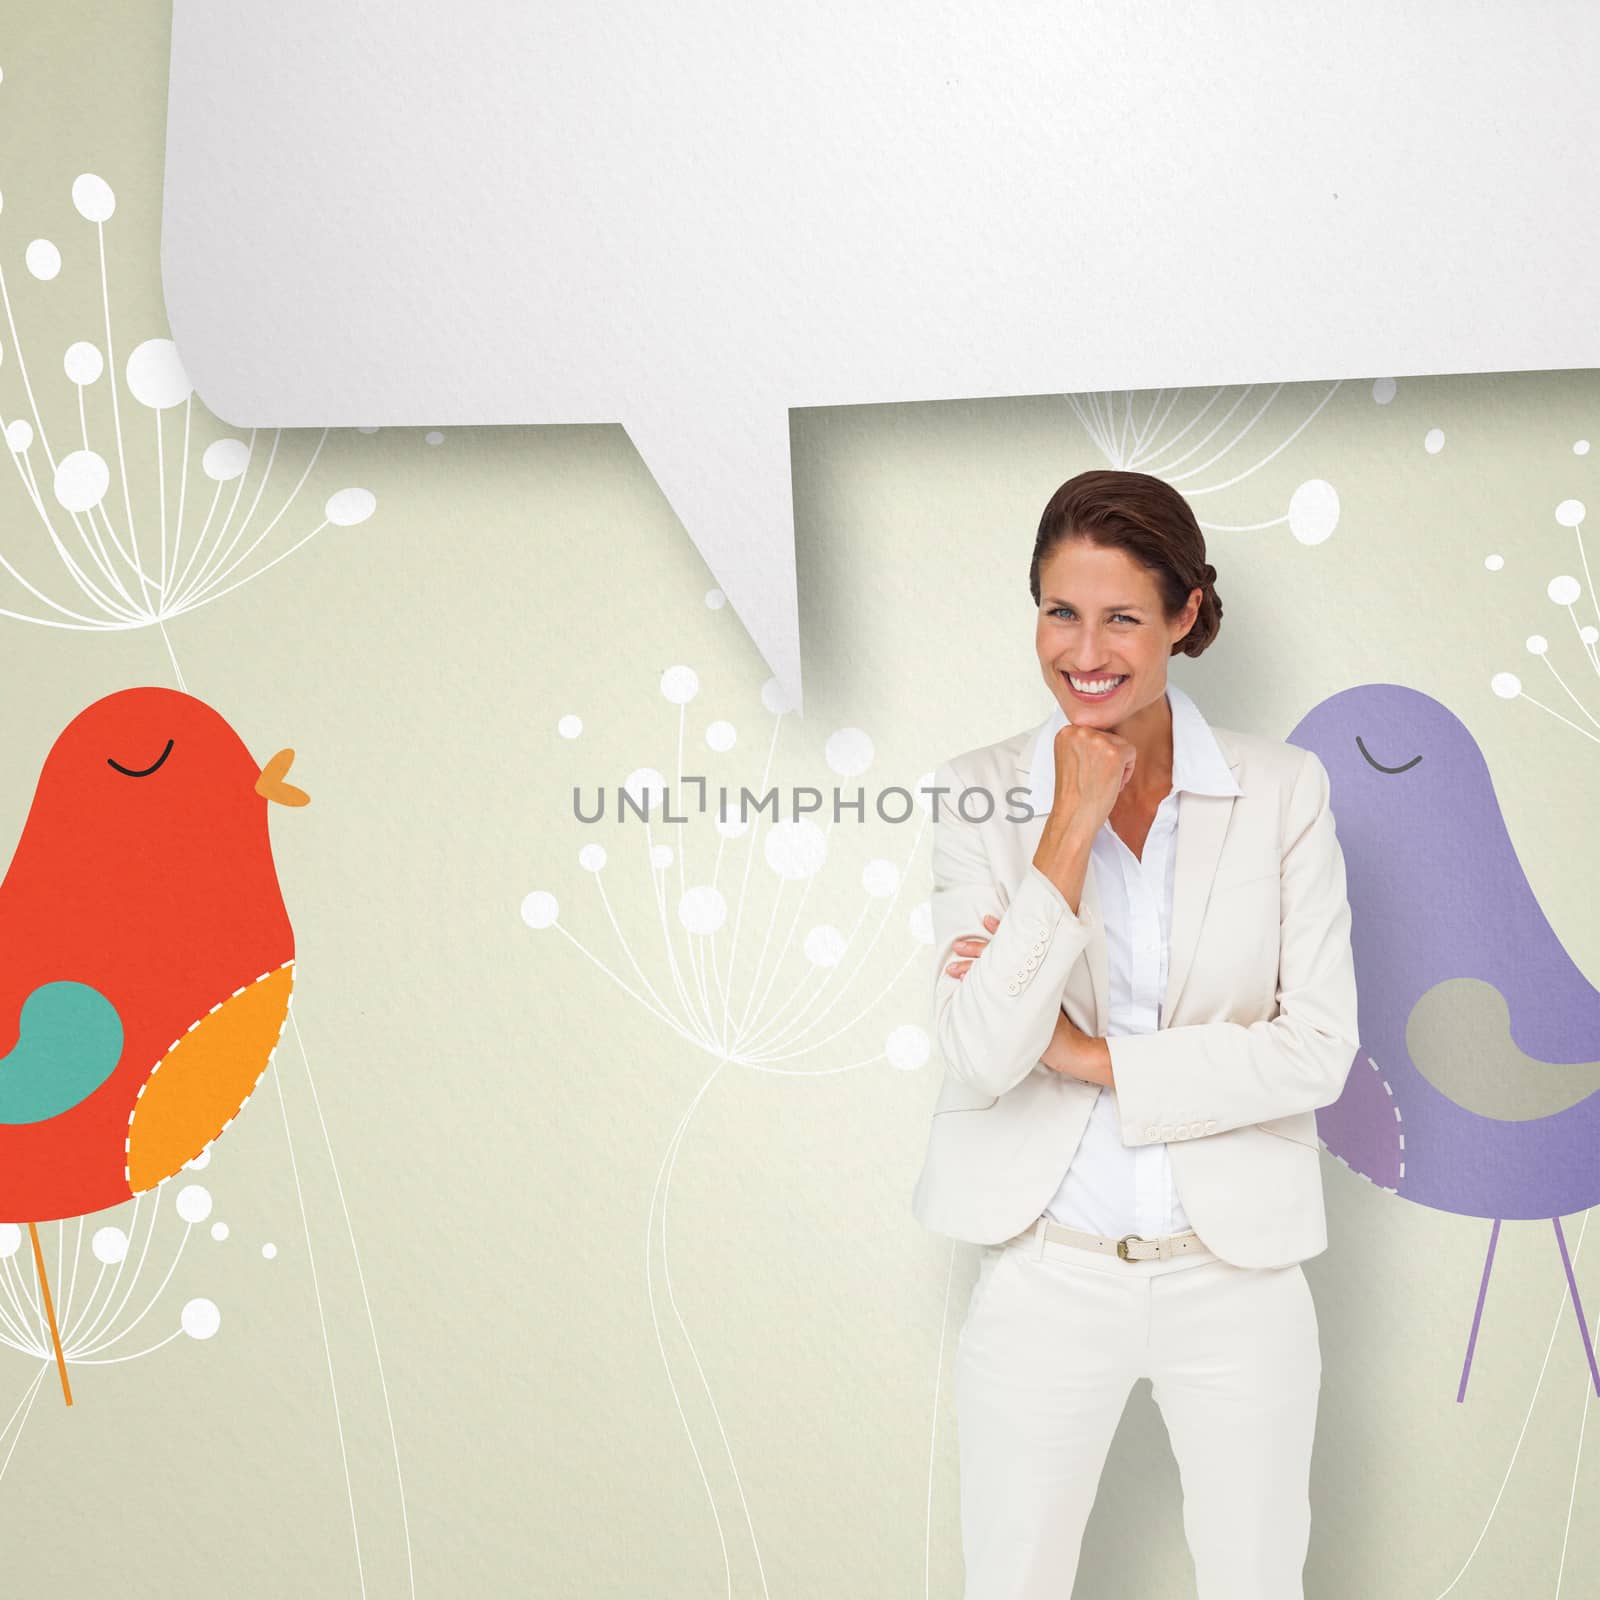 Thinking businesswoman with speech bubble against feminine design of dandelions and birds 